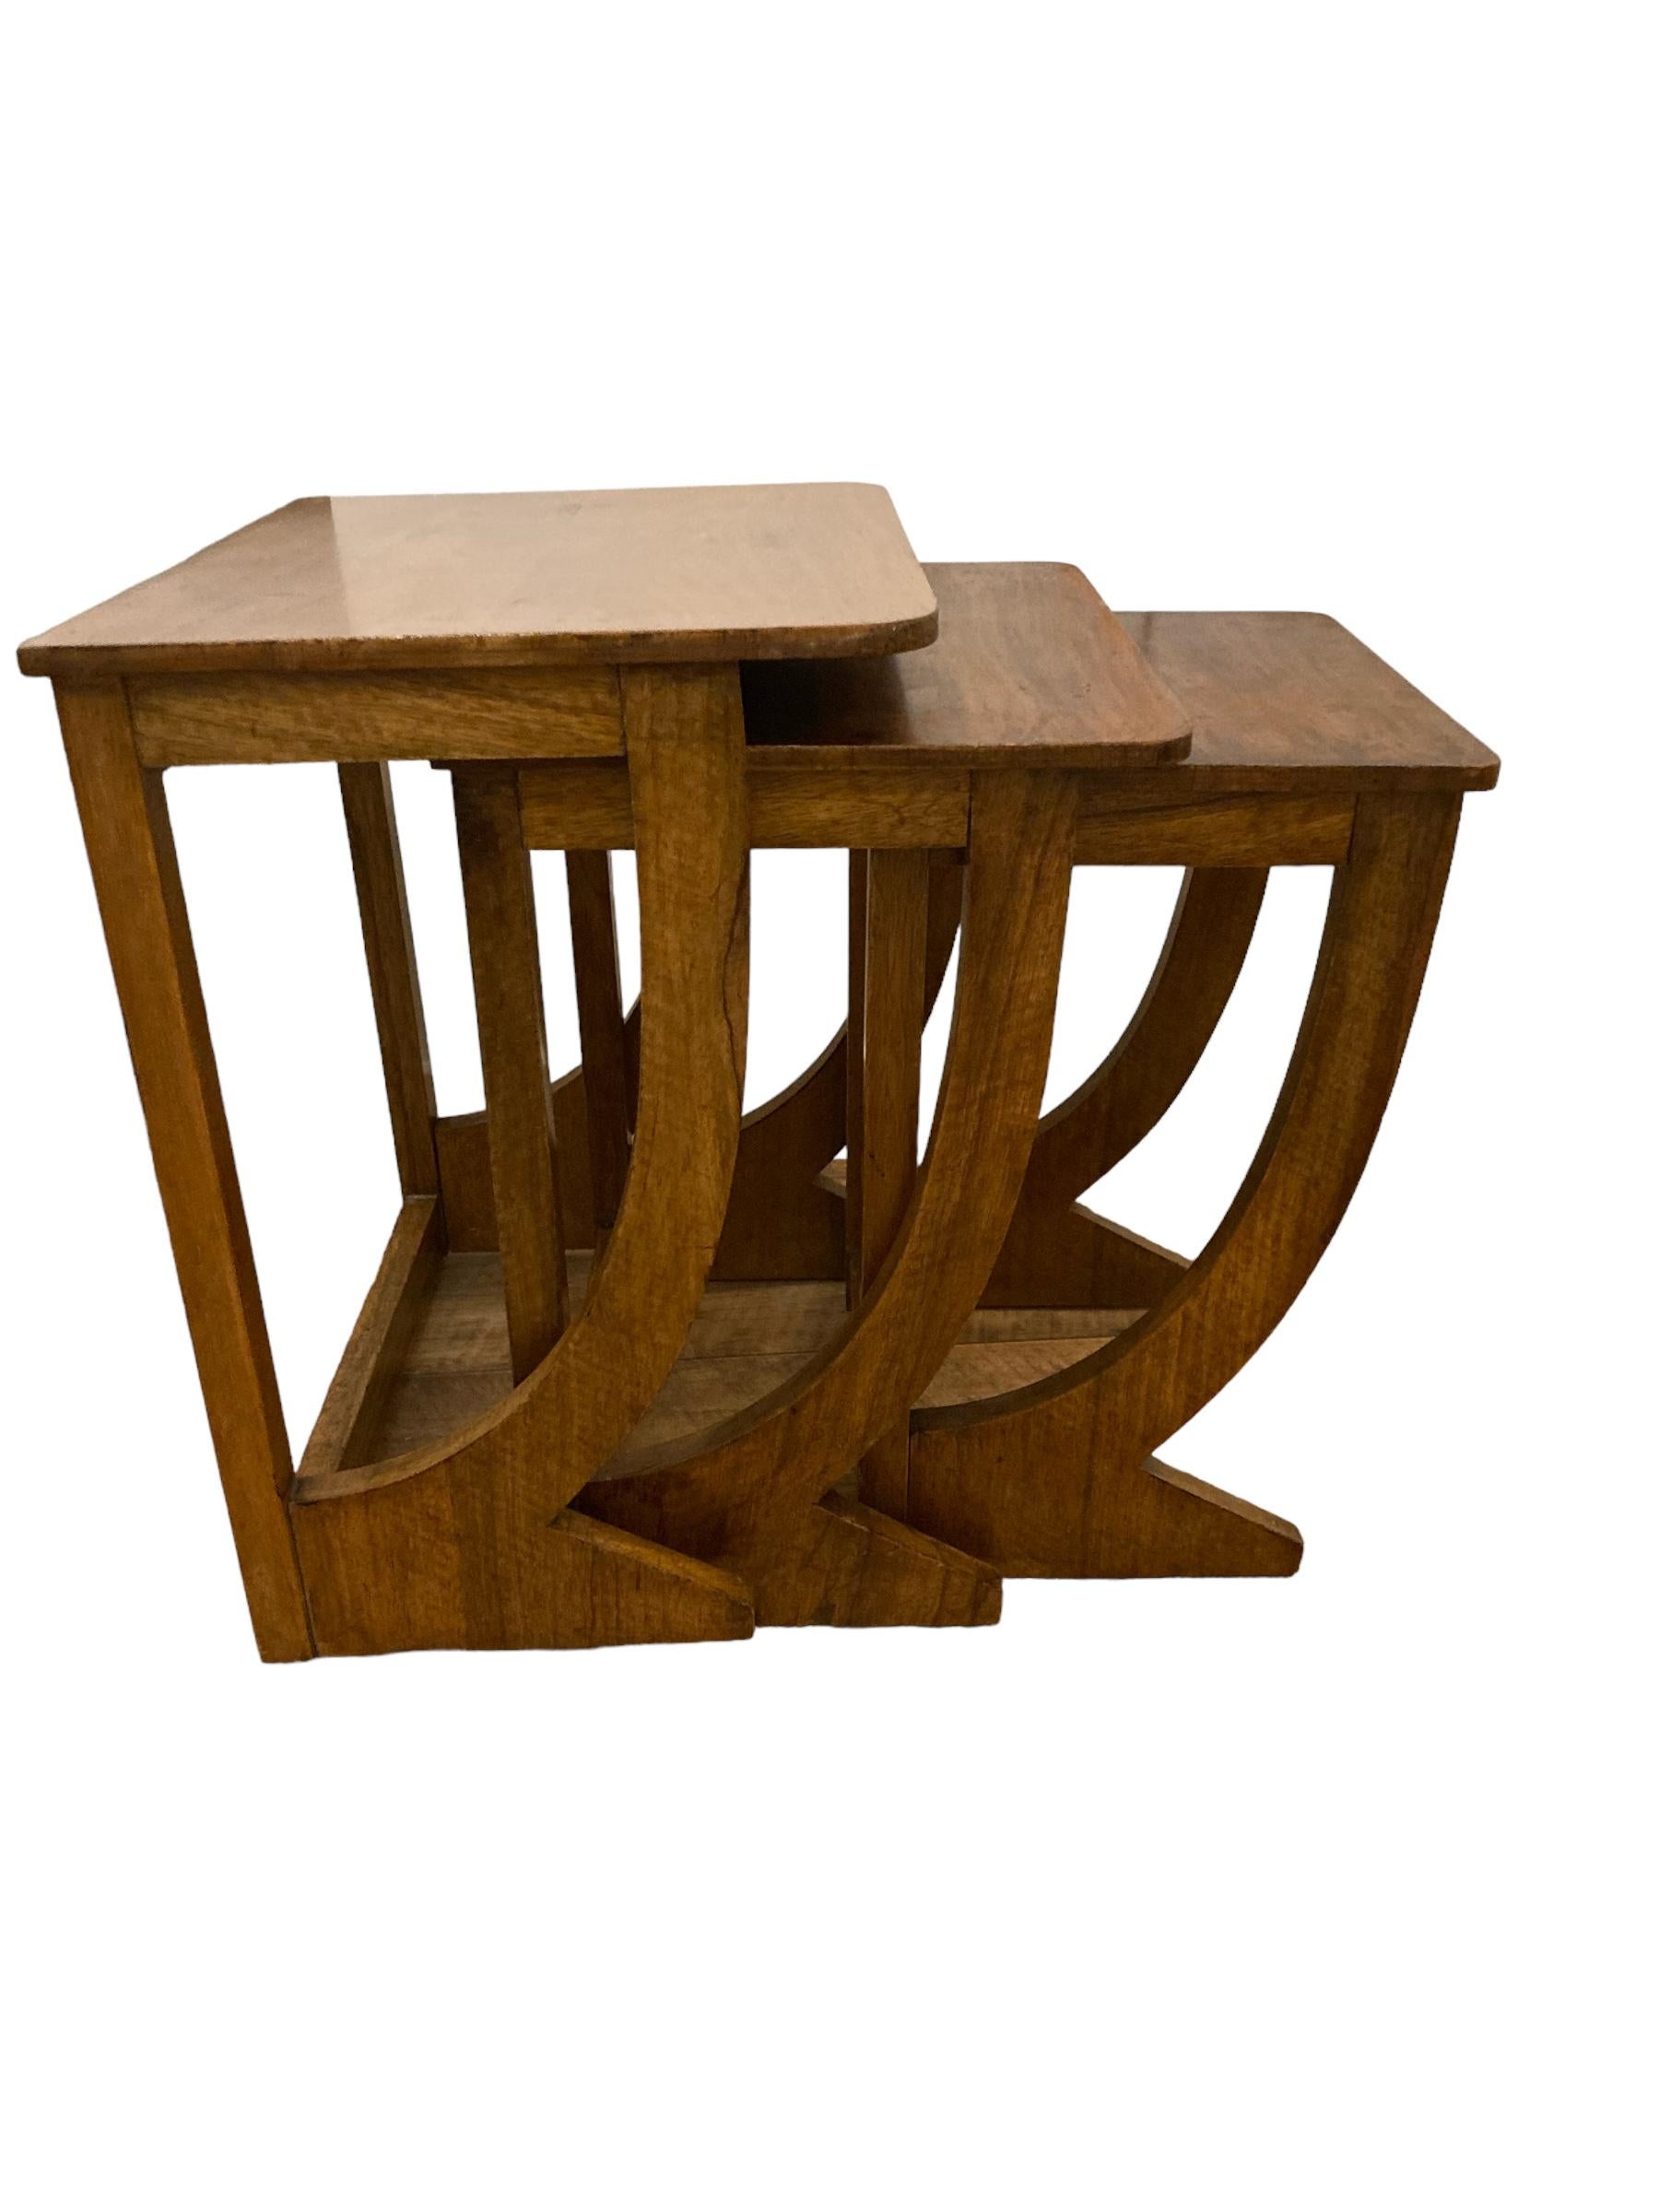 Rare Find. French Art Deco Walnut Nest of Tables. Early 1900's. Crafted with precision and attention to detail. Made from Walnut, they boast durability and longevity, ensuring years of use. Whether used together or separately, this set offers